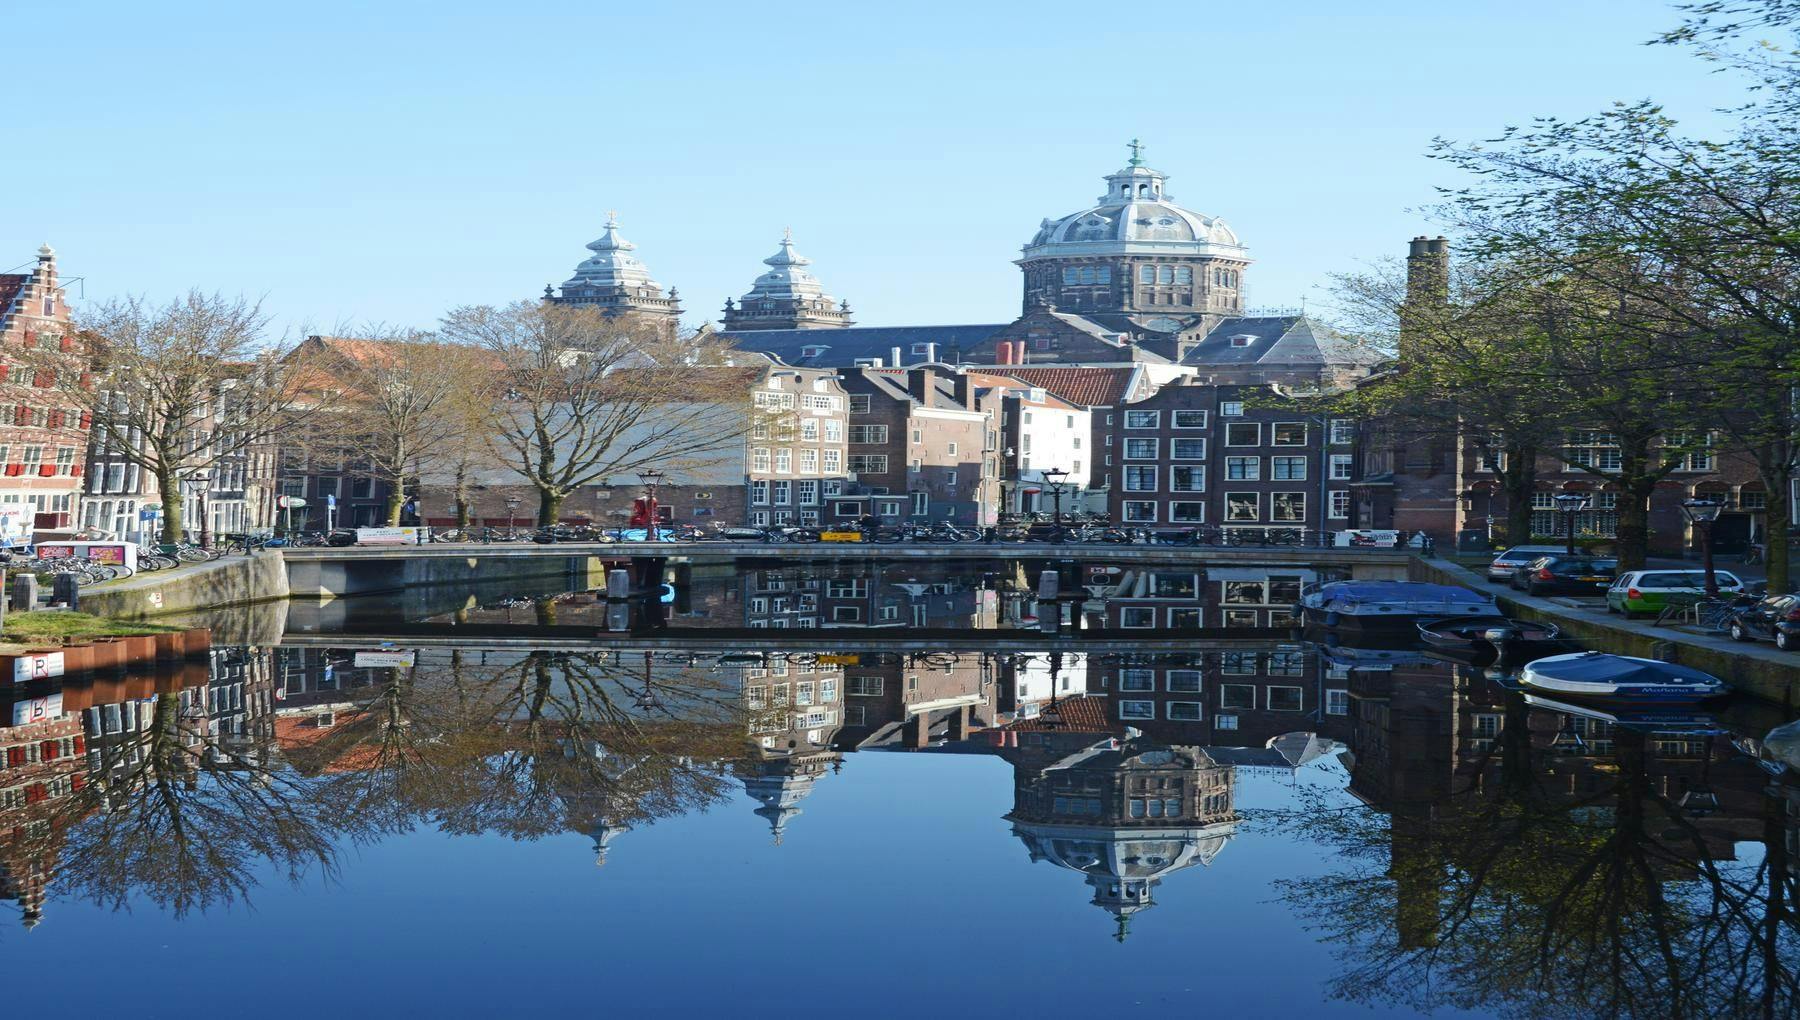 View of the Sint Nicolaaskerk building over the canal at spring